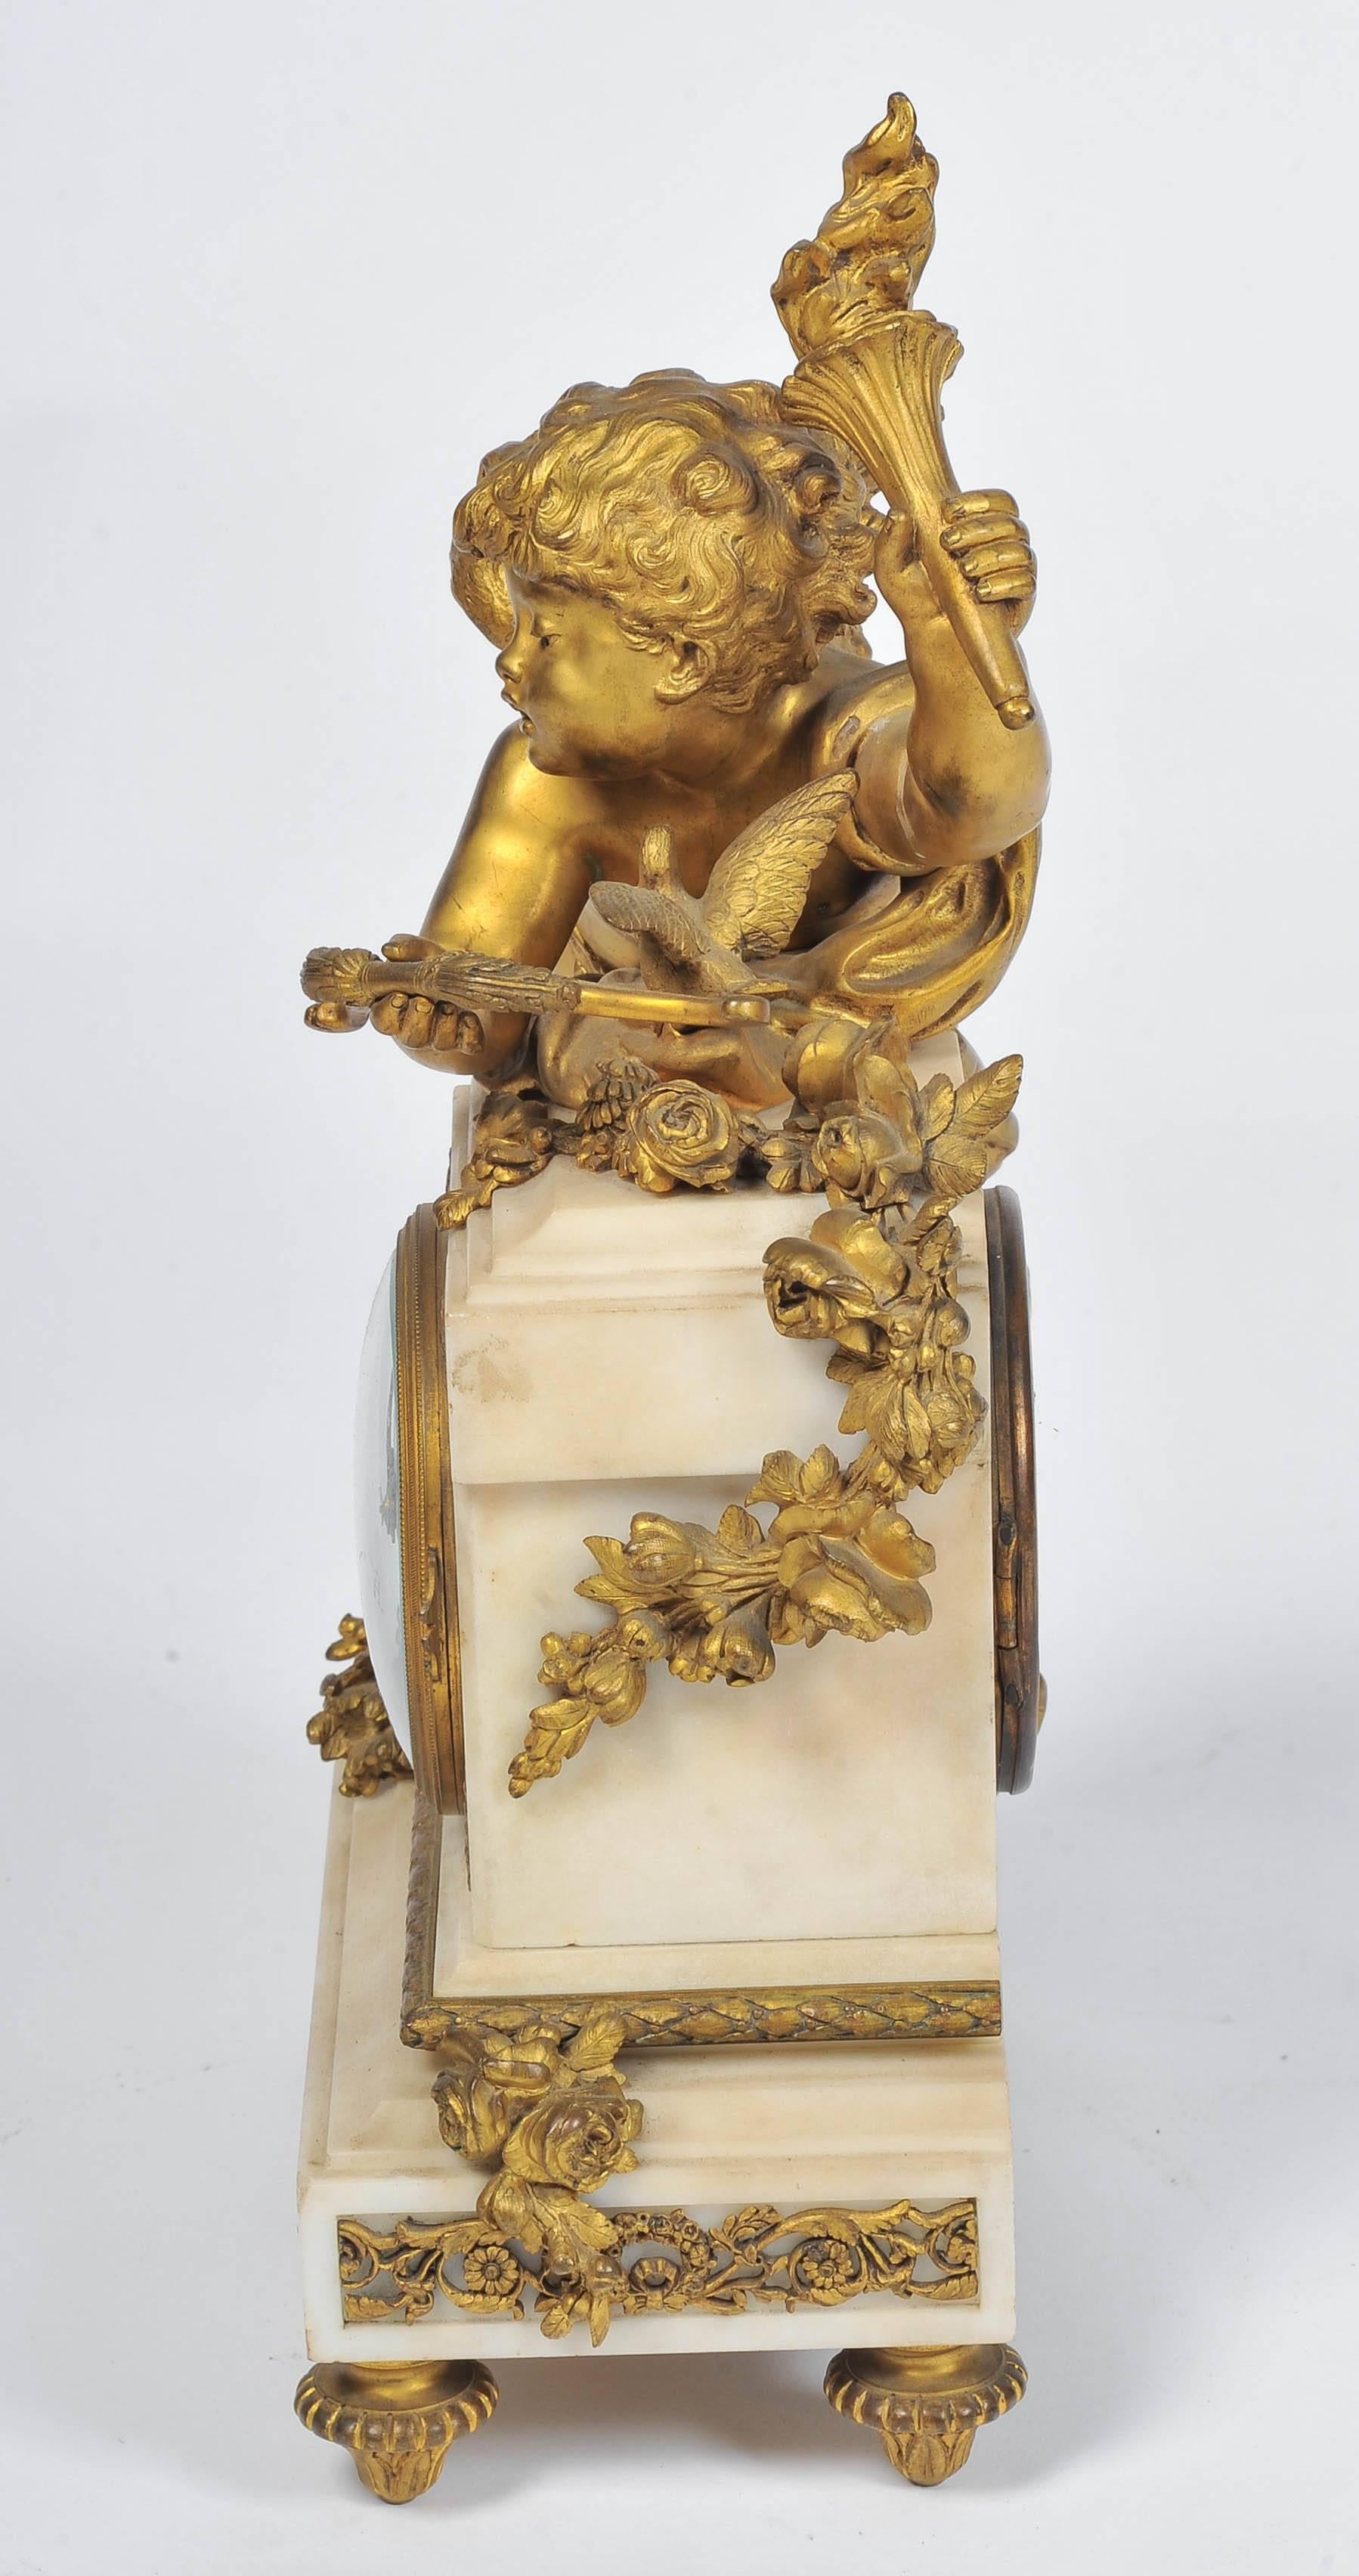 A very pleasing 19th century French gilded ormolu and white marble mantel clock, having a cherub holding a torch and a bow and arrow, leaning against the inset eight day chiming clock.